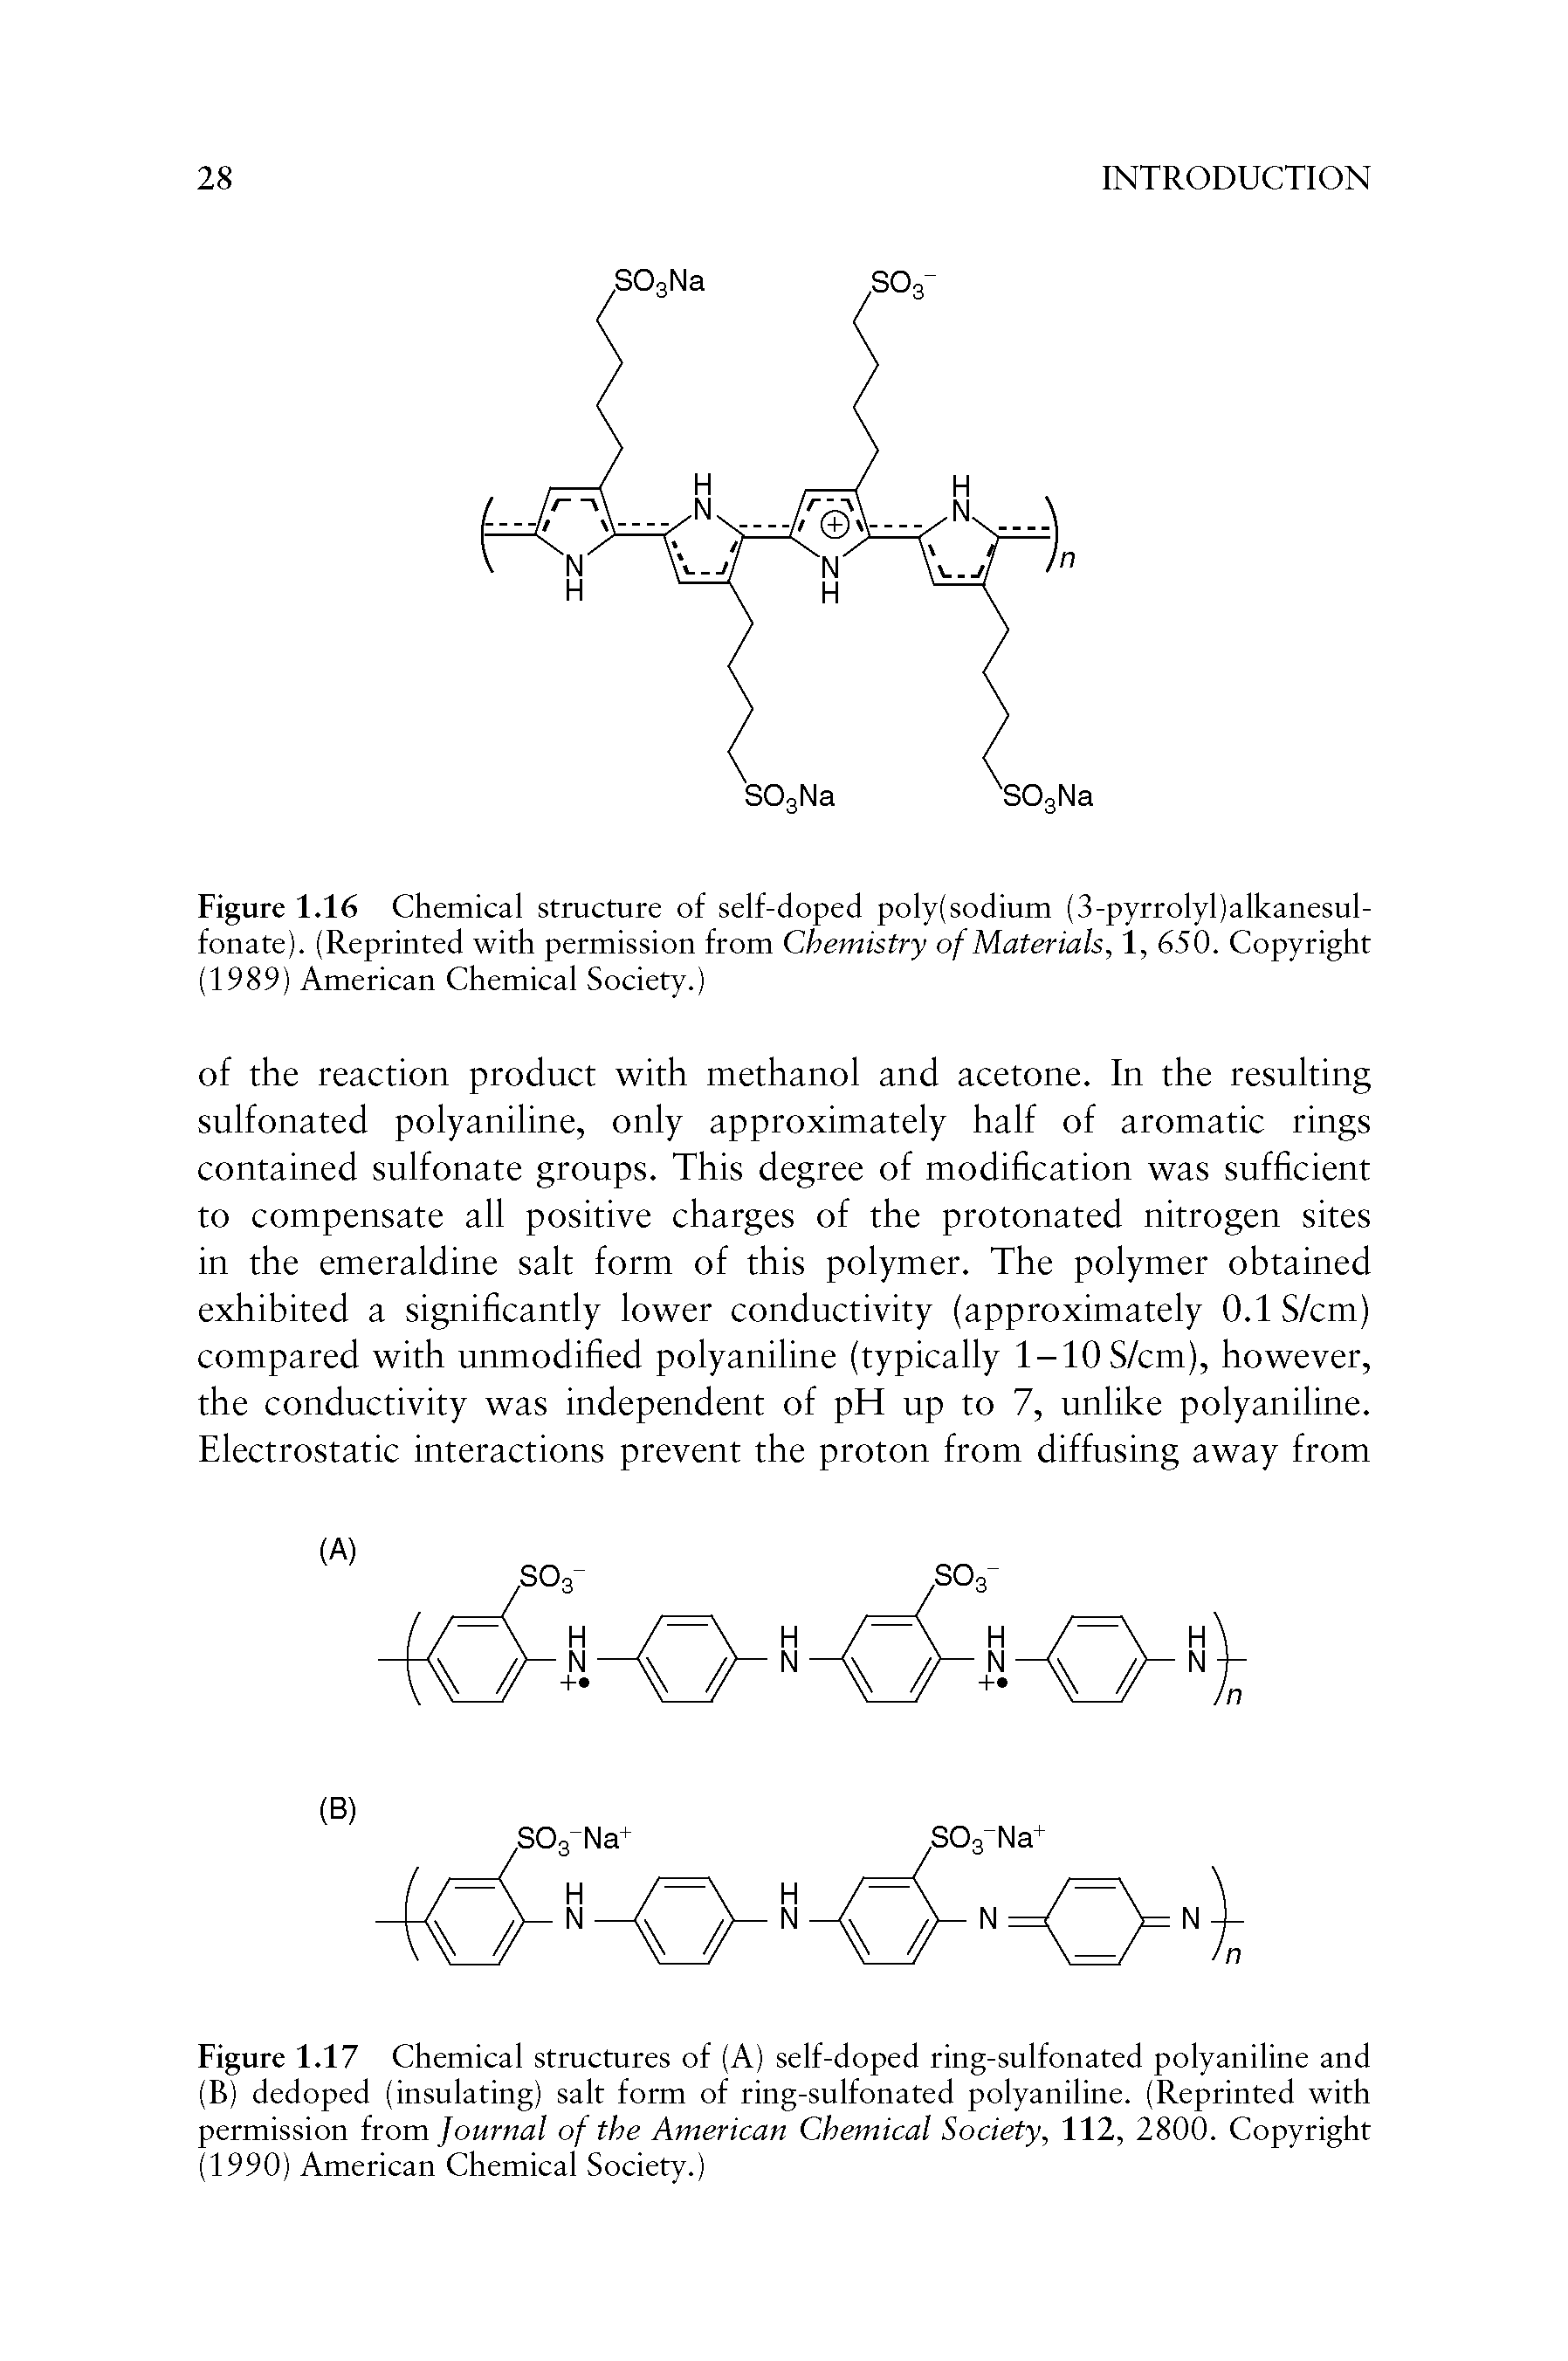 Figure 1.17 Chemical structures of (A) self-doped ring-sulfonated poly aniline and (B) dedoped (insulating) salt form of ring-sulfonated polyaniline. (Reprinted with permission from Journal of the American Chemical Society, 112, 2800. Copyright (1990) American Chemical Society.)...